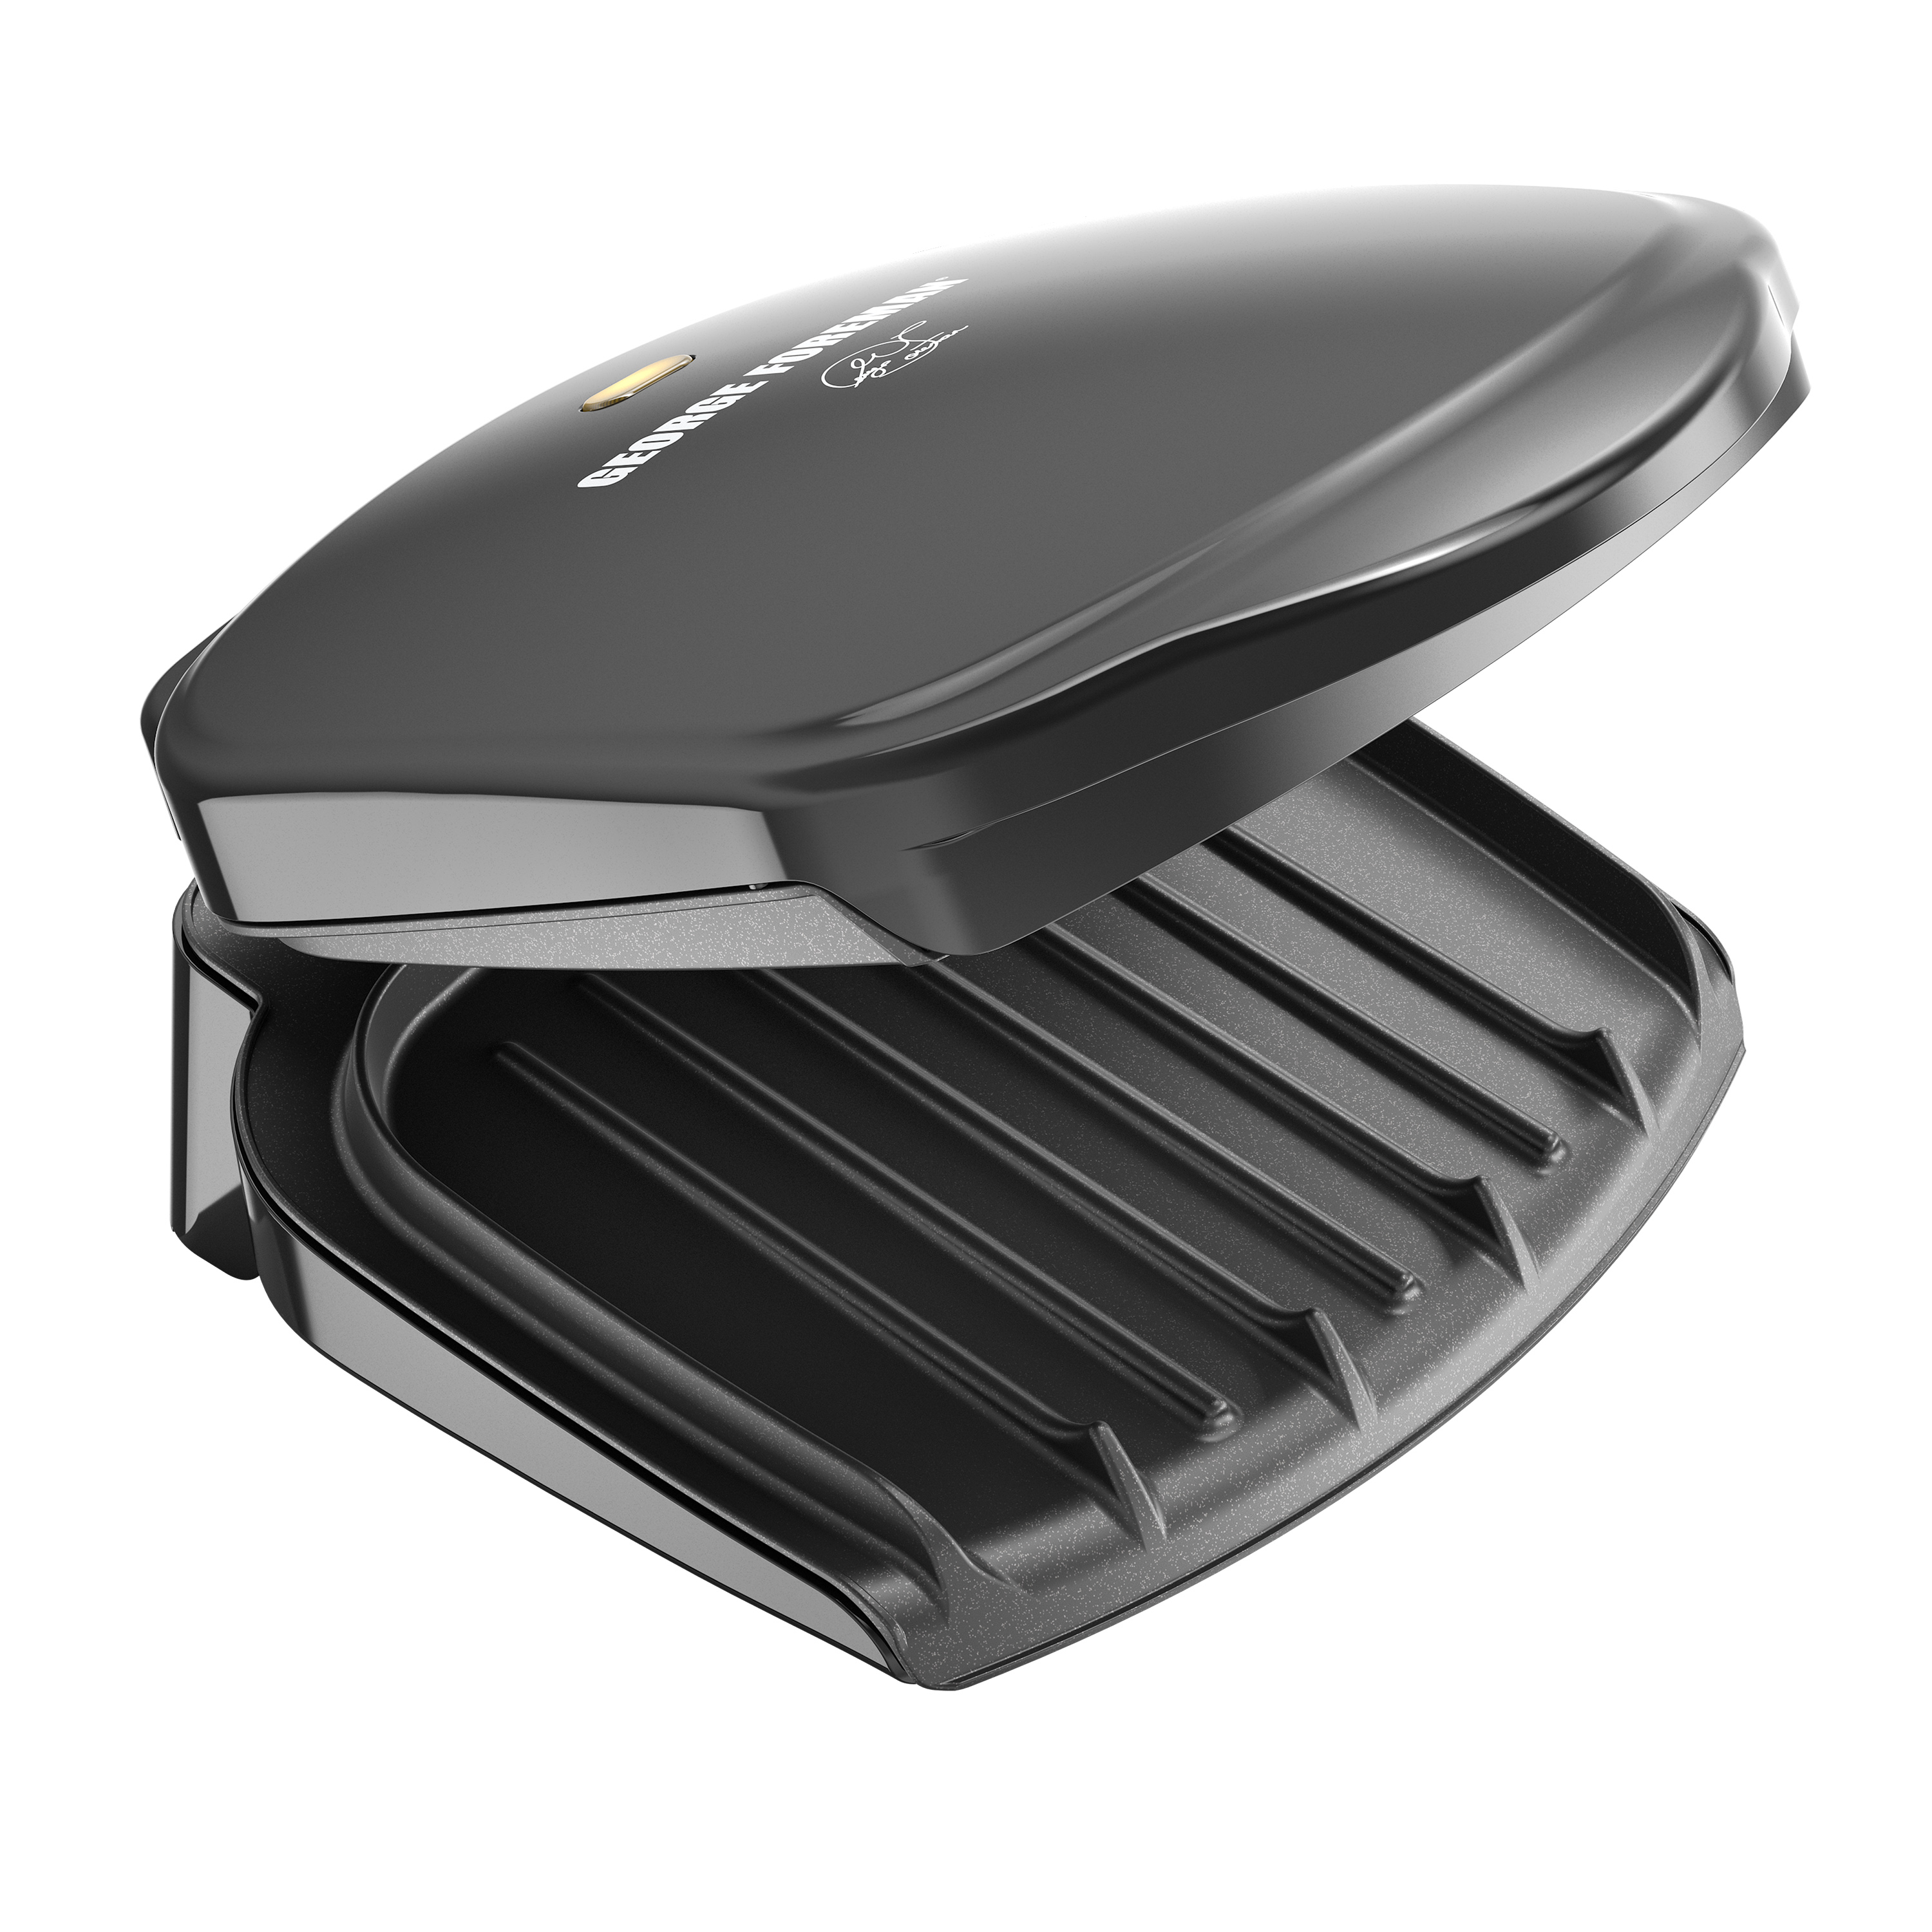 George Foreman 2-Serving Classic Plate Electric Indoor Grill and Panini Press, Black, GR10B - image 4 of 13